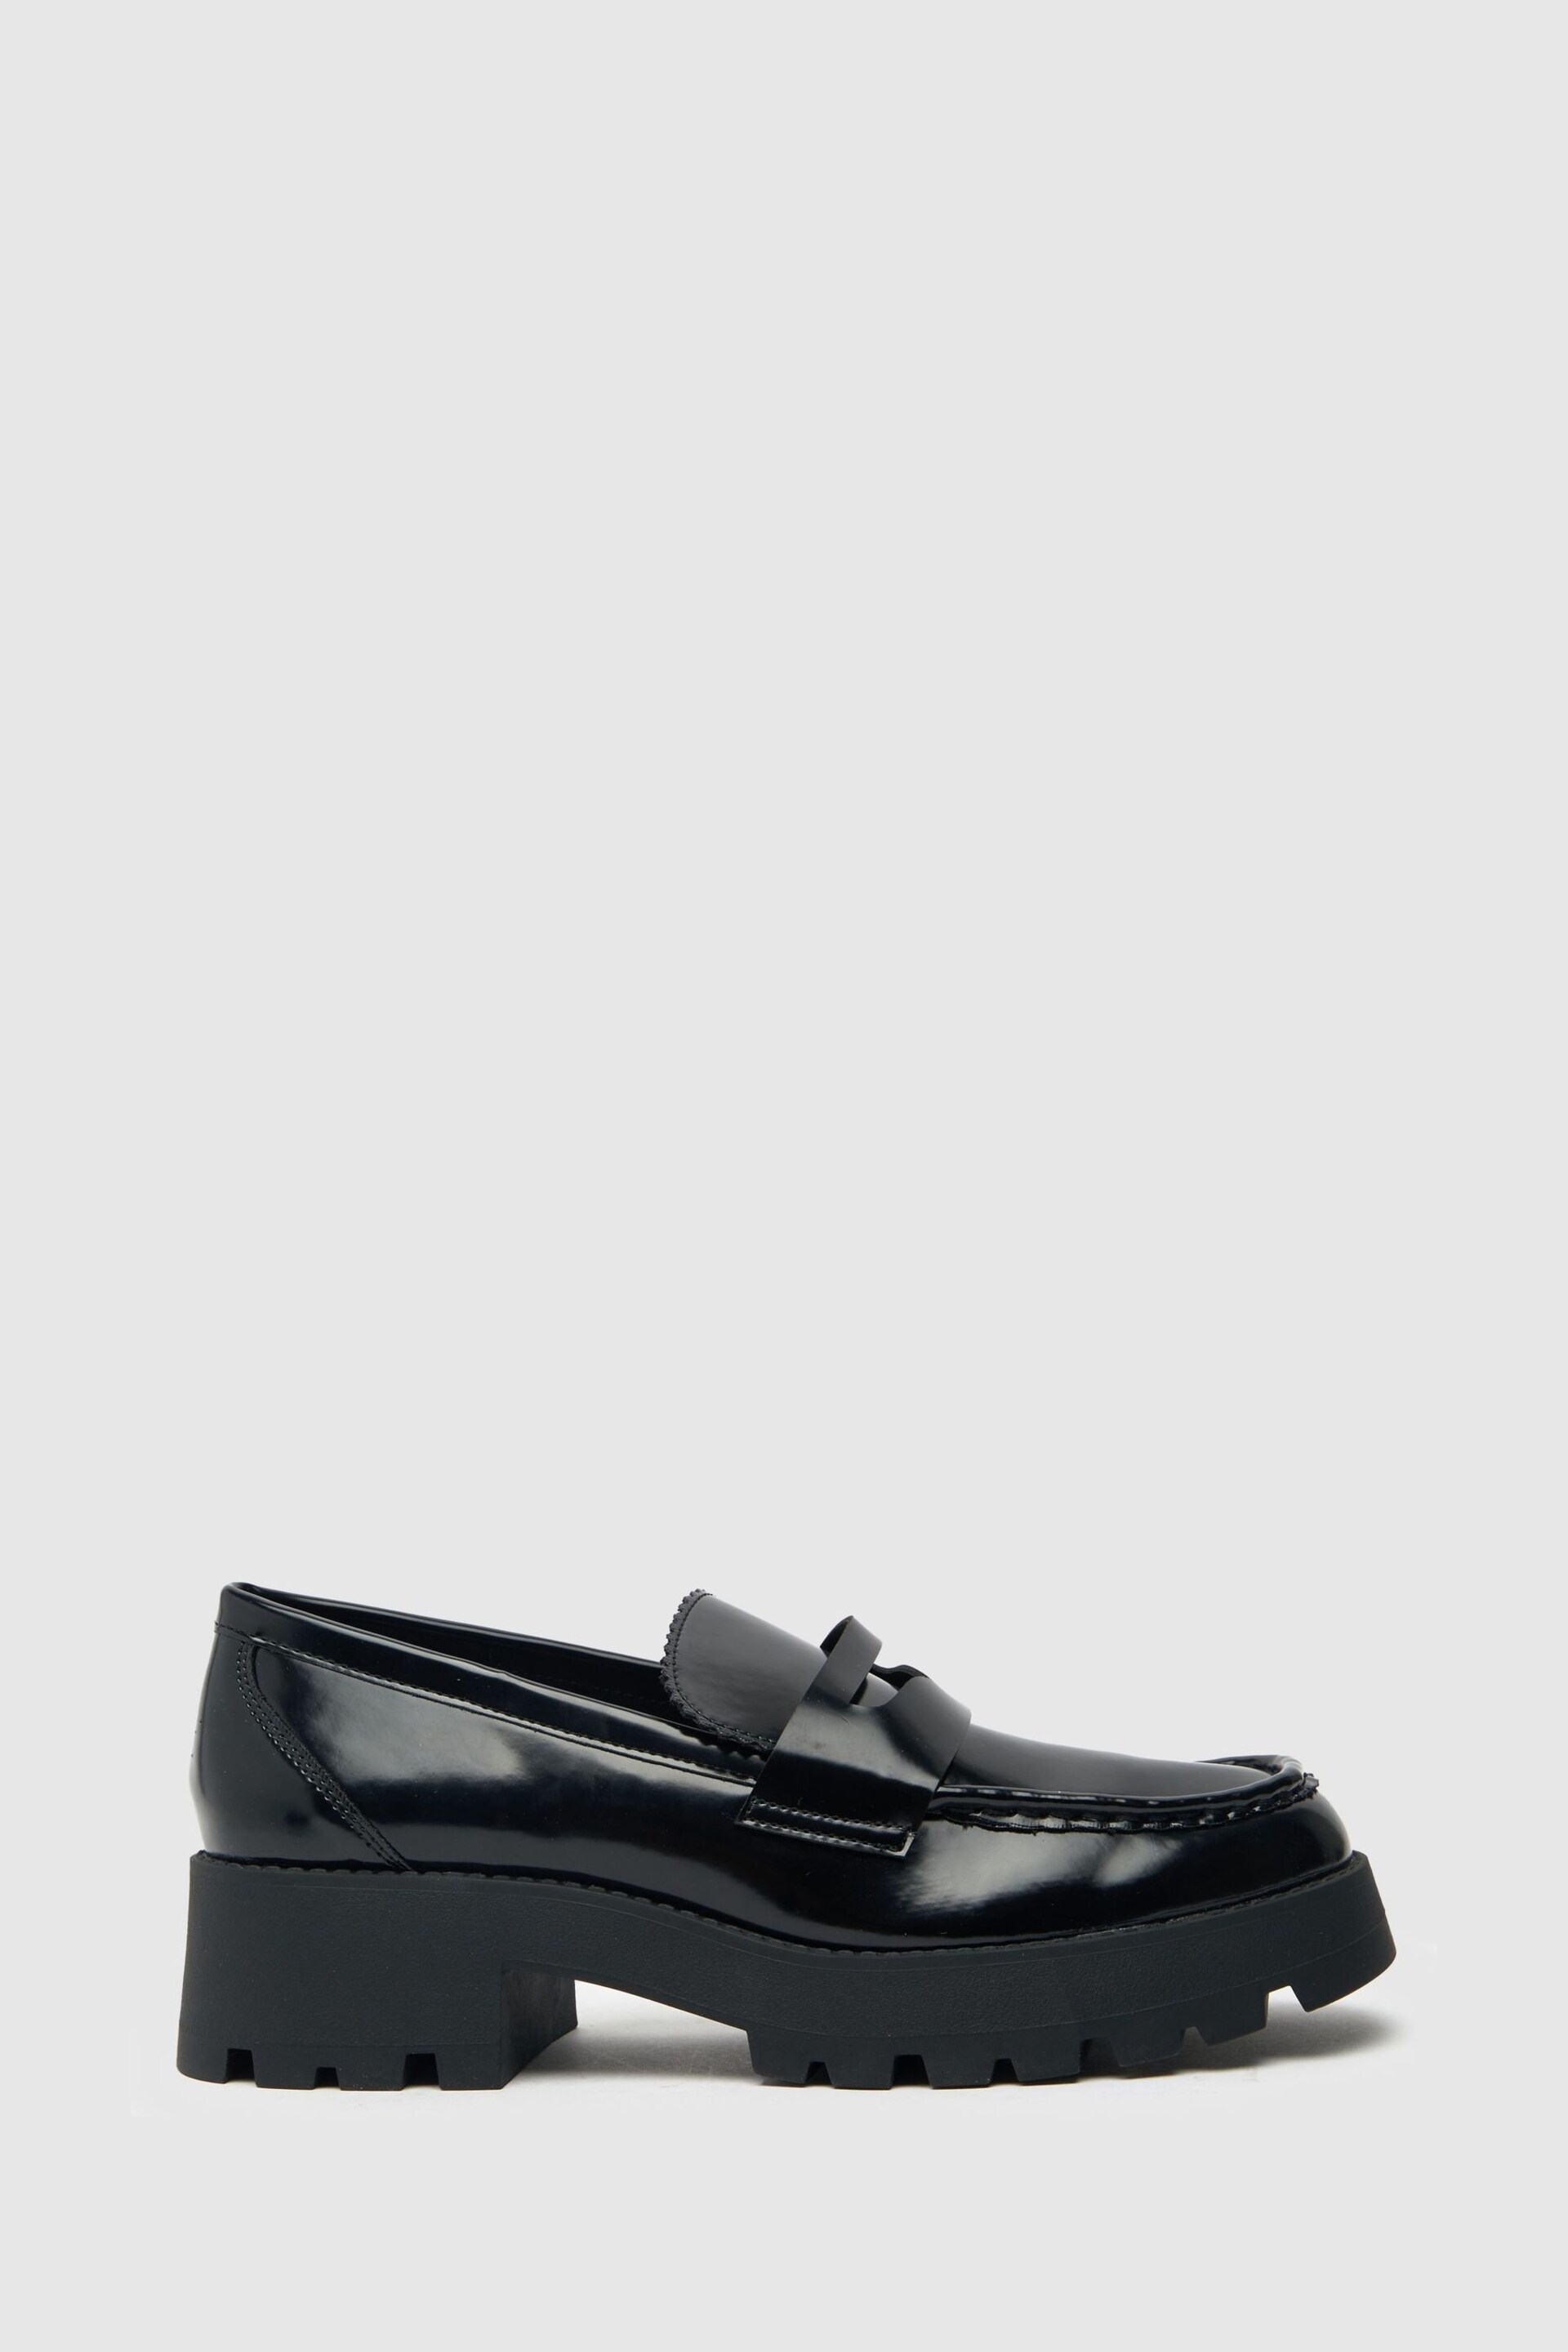 Schuh Levi Chunky Black Loafers - Image 1 of 4